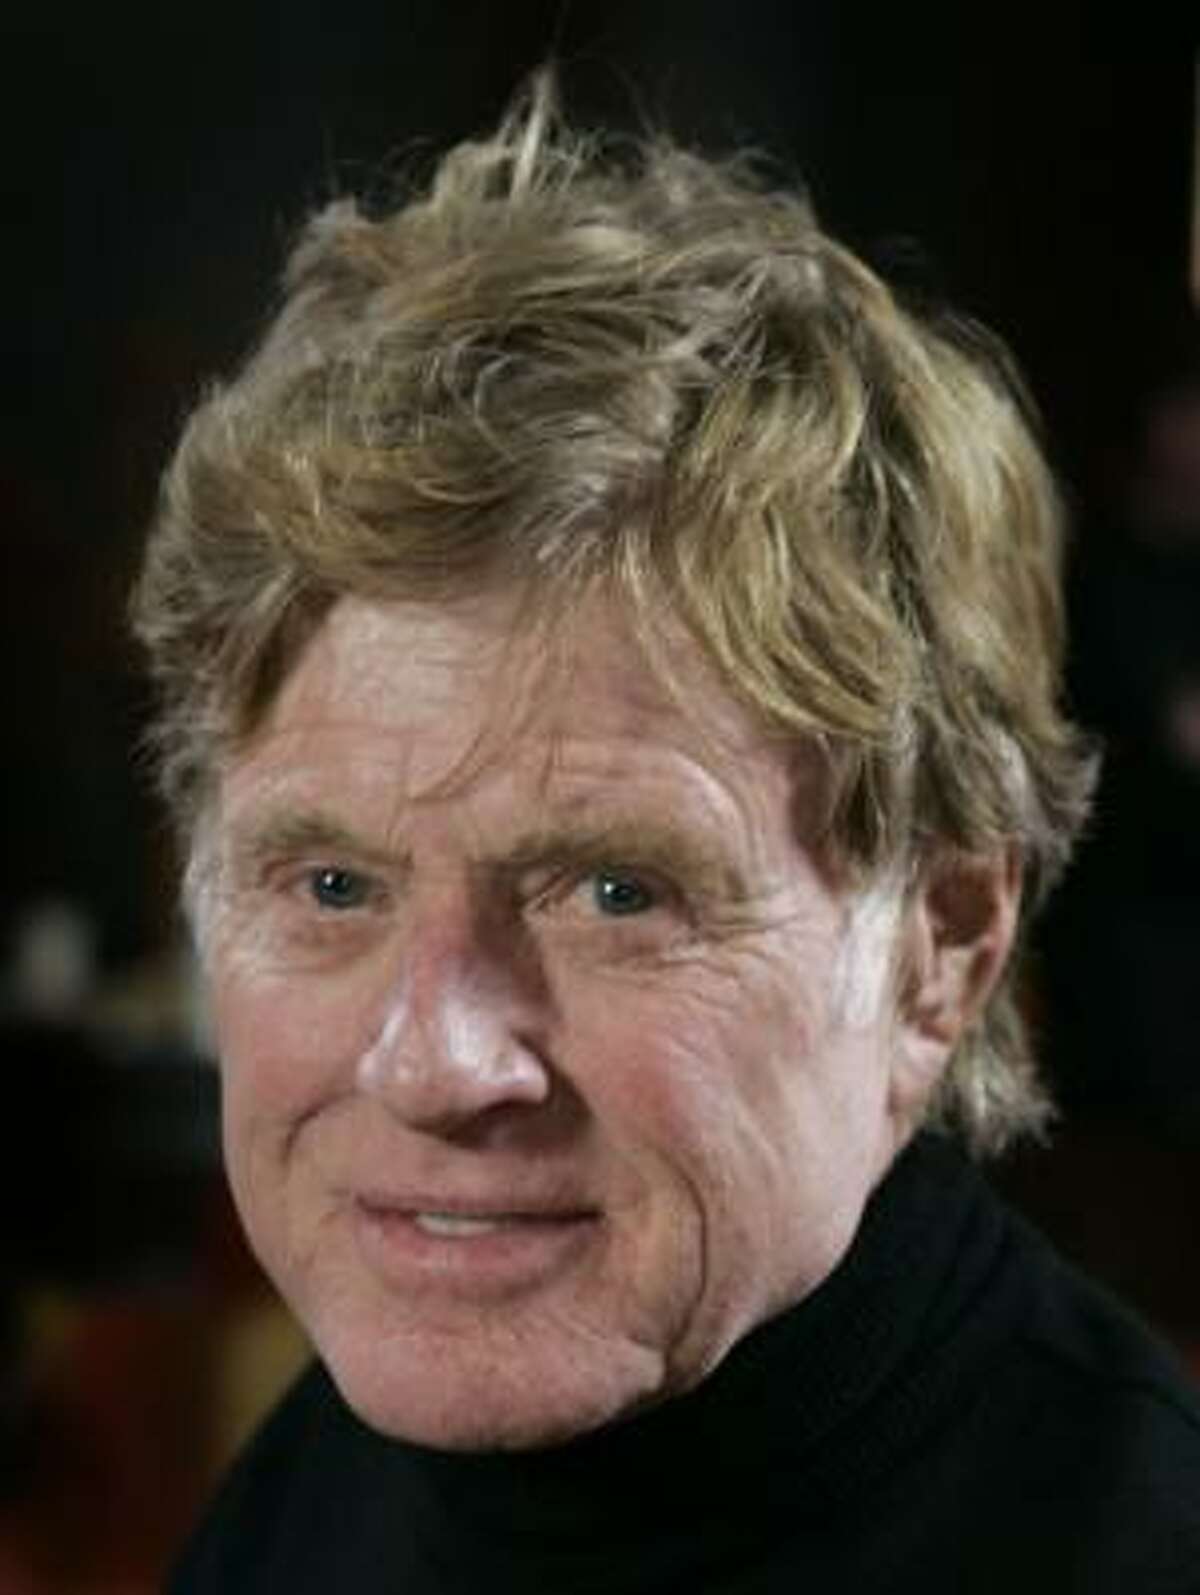 Robert Redford Redford will be at the Houston screening sponsored by the Progressive Forum.